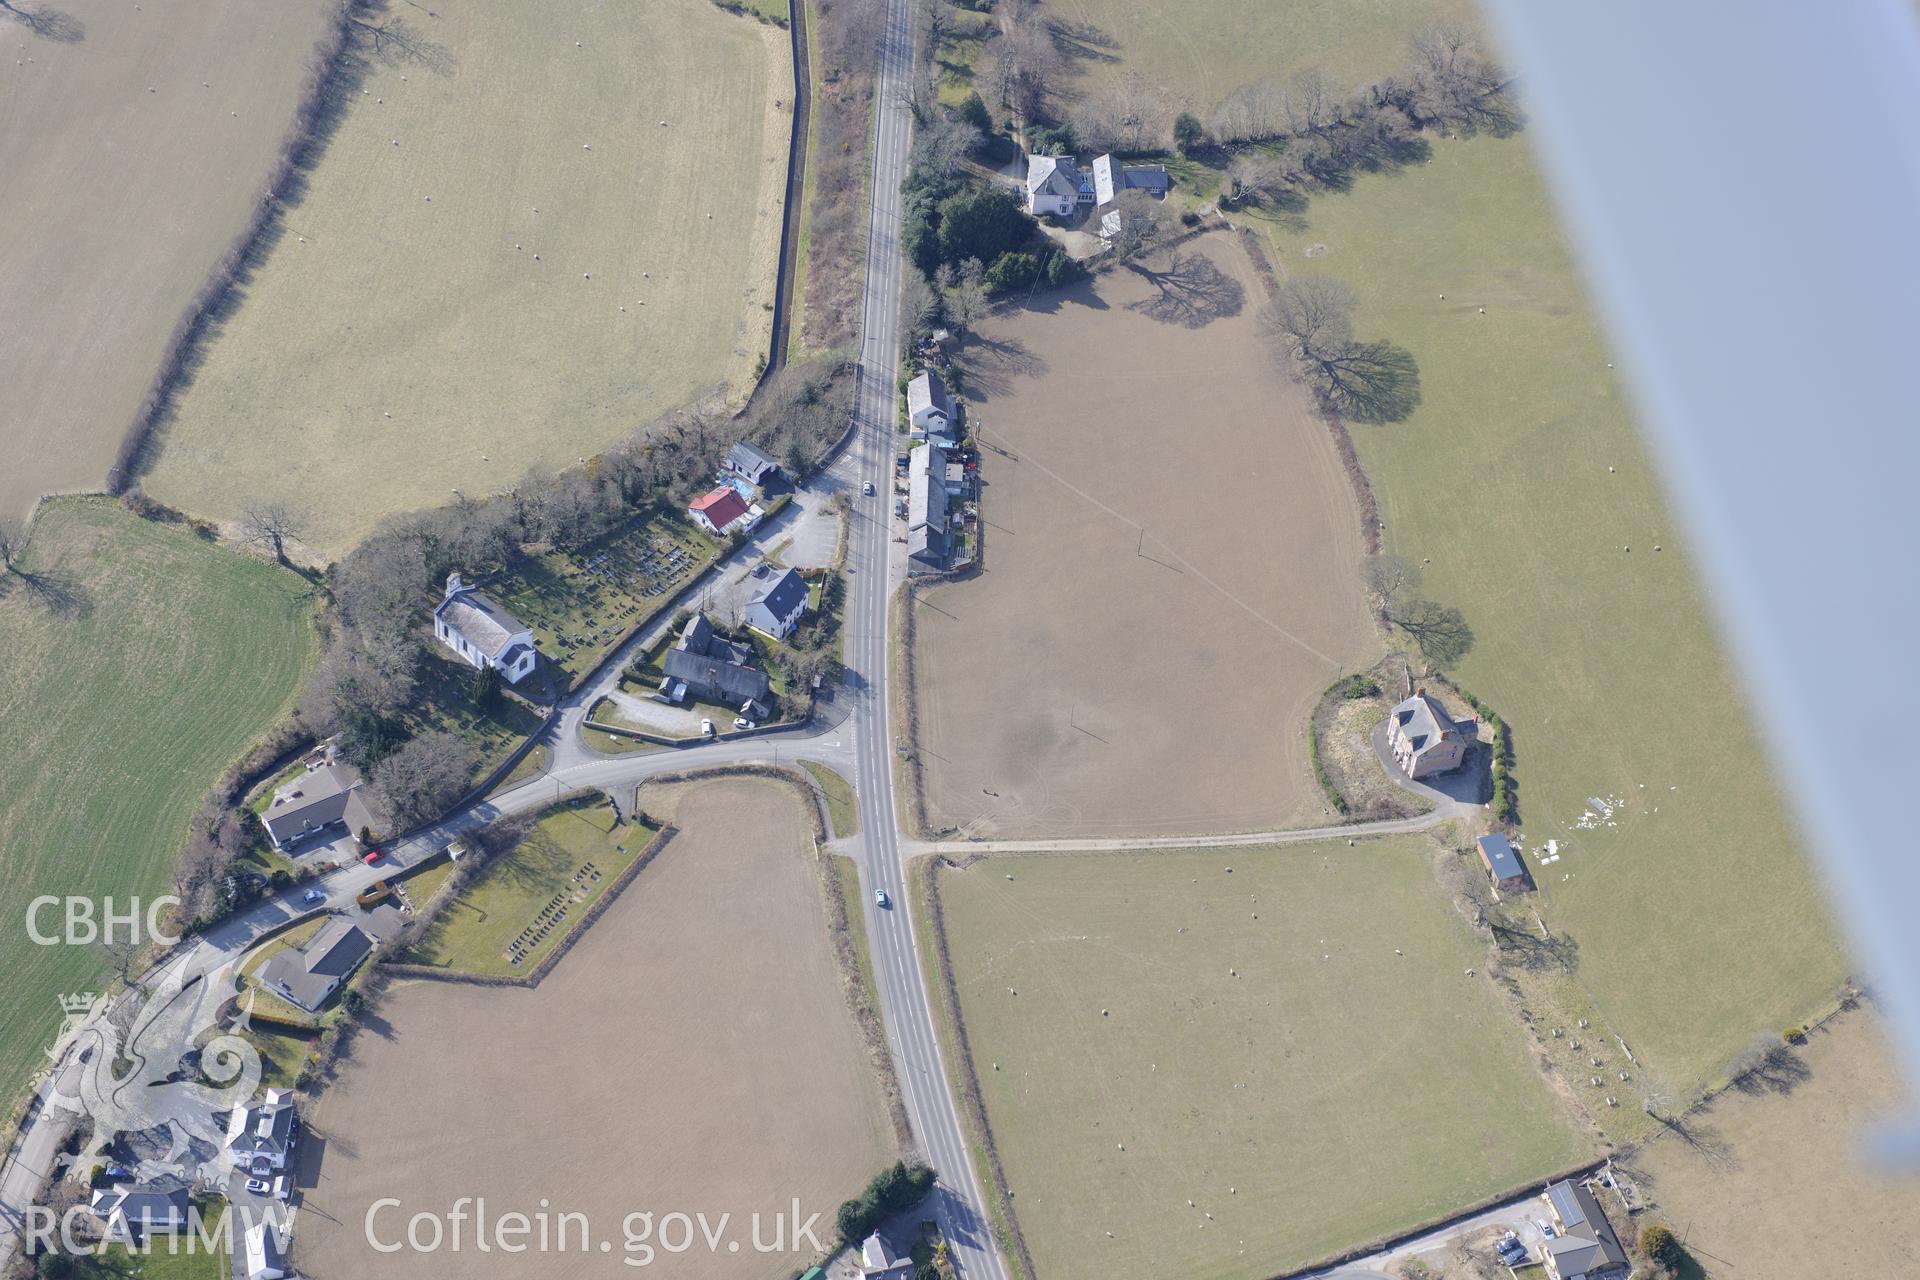 The village of Capel Bangor, east of Aberystwyth, with its church dedicated to St. David's. Oblique aerial photograph taken during the Royal Commission's programme of archaeological aerial reconnaissance by Toby Driver on 2nd April 2013.